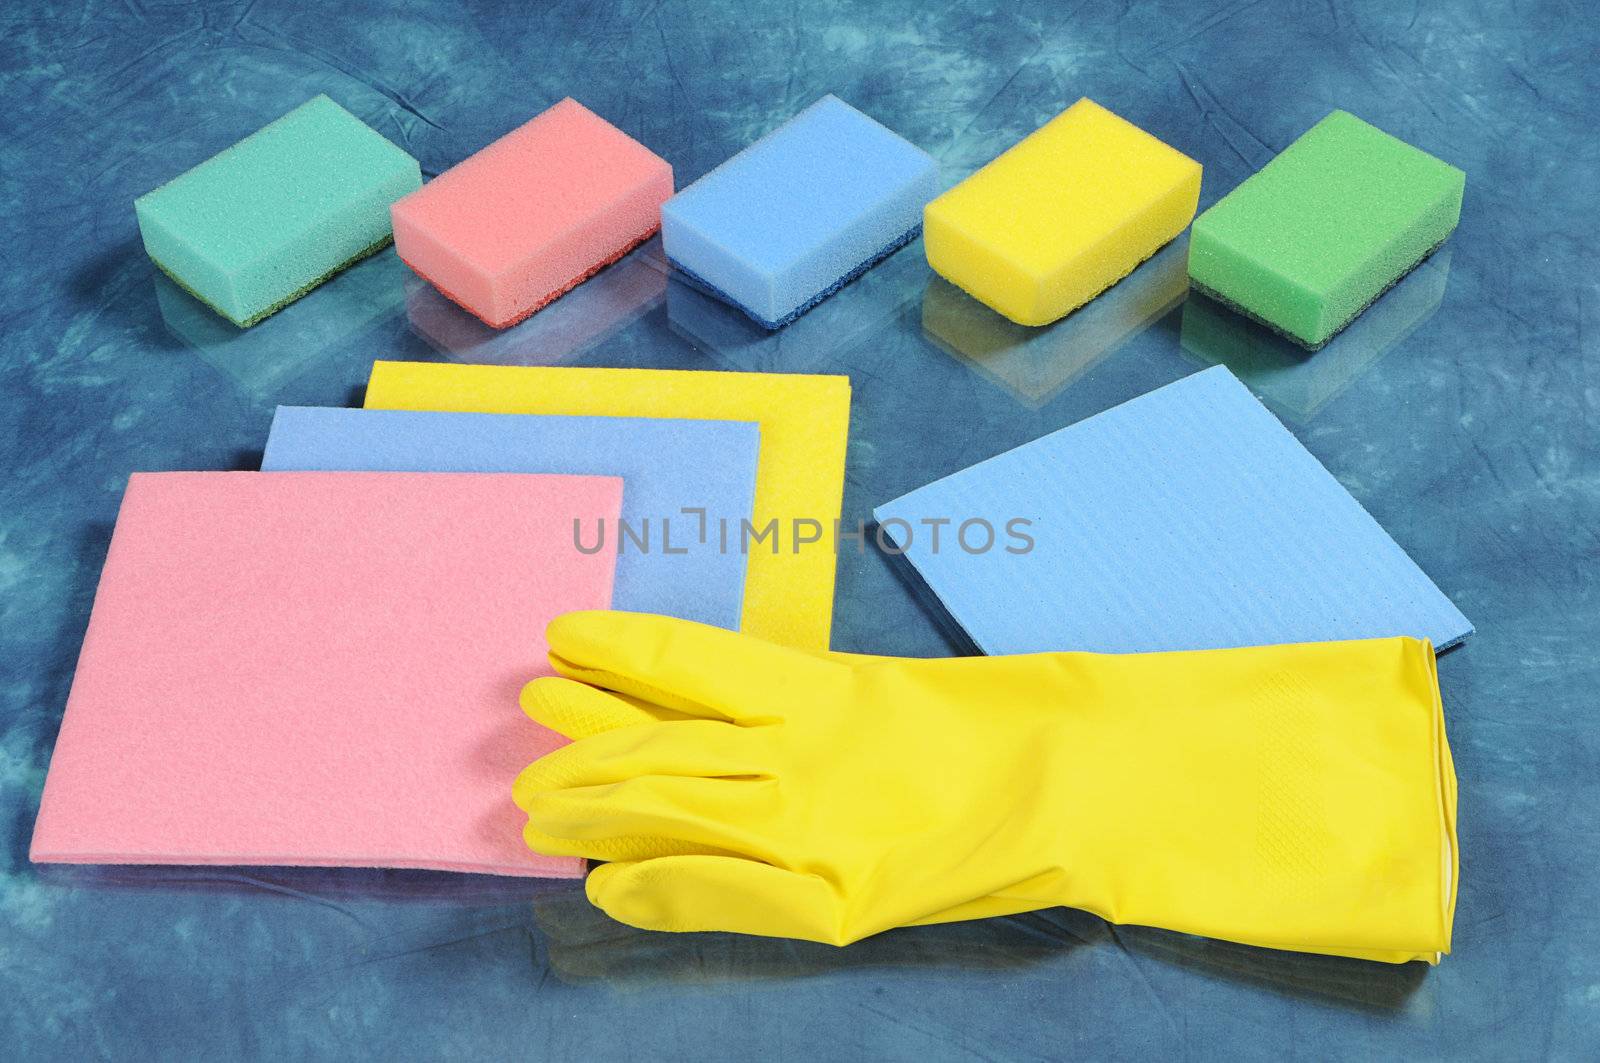 A set of cleaning tools, including kitchen sponges, absorbing cloths, household gloves